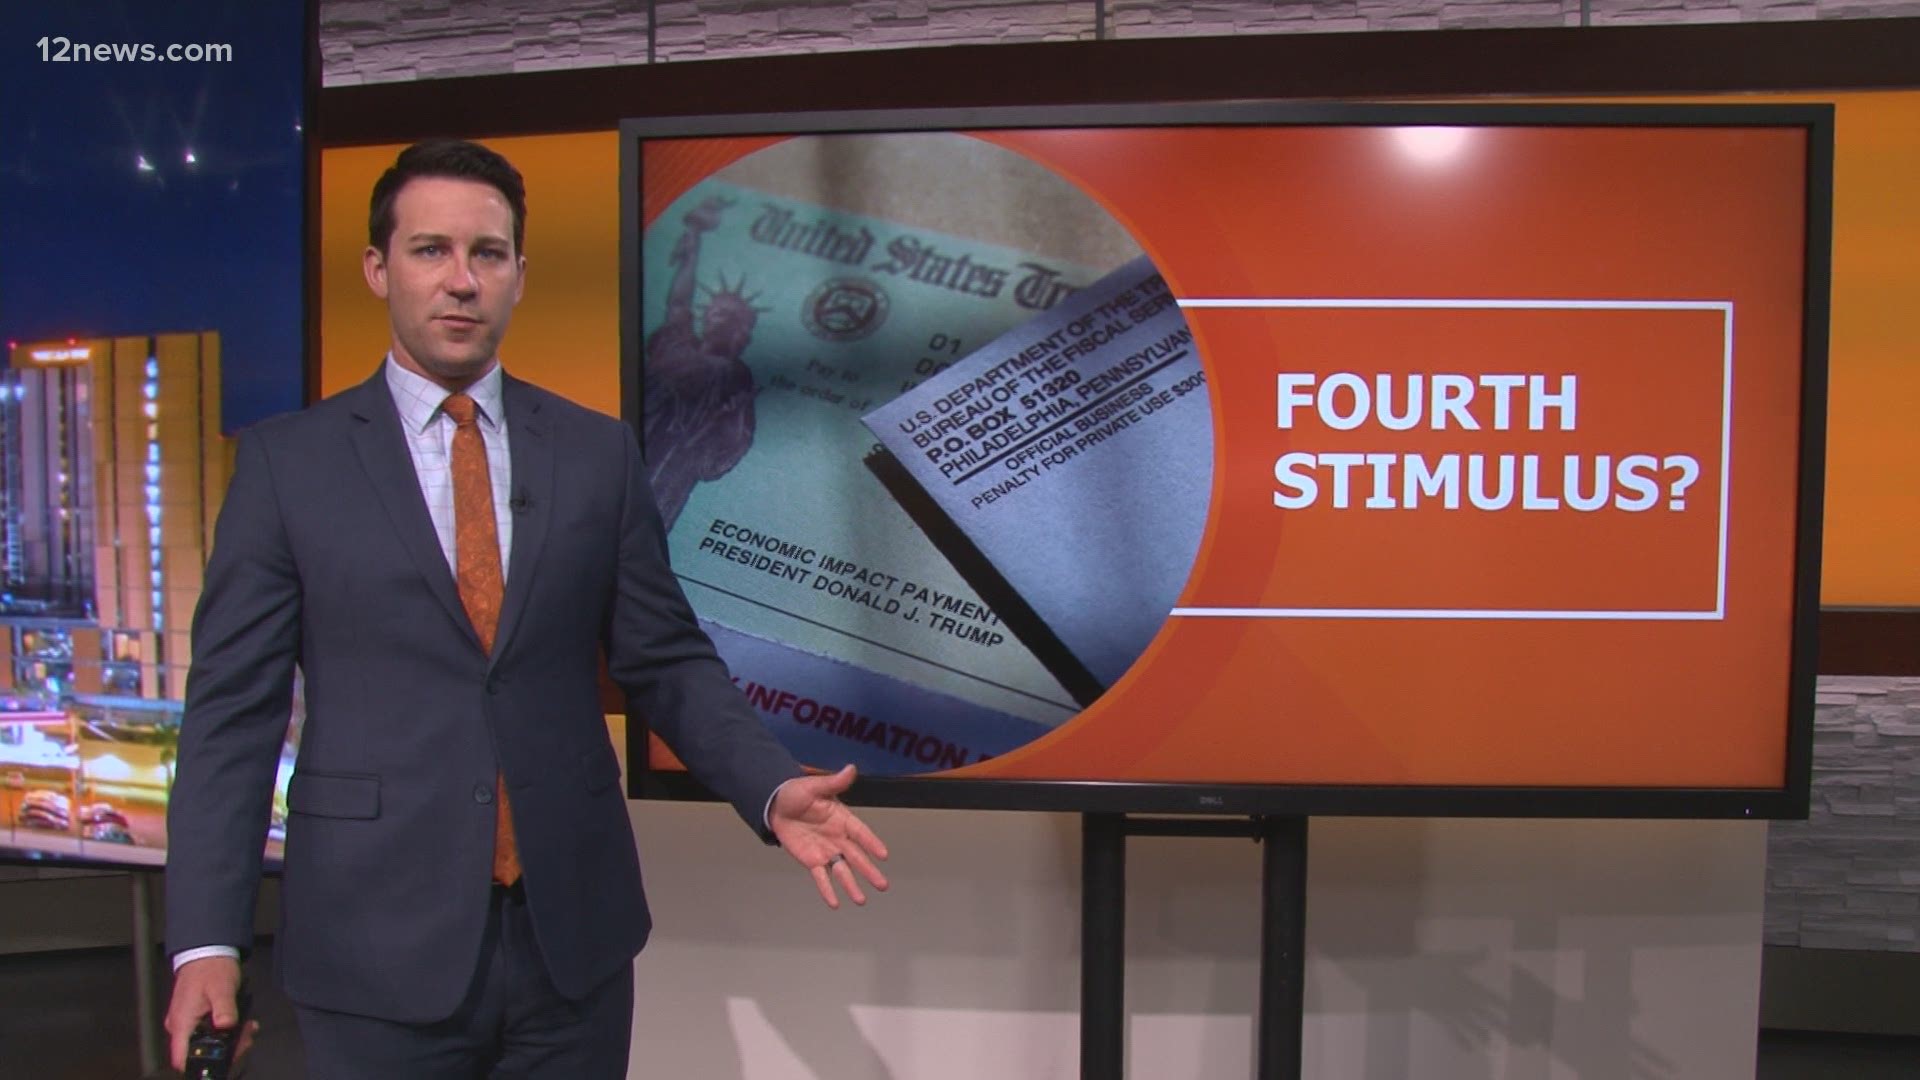 Should there be a fourth stimulus check? 12 News viewers share their thoughts.